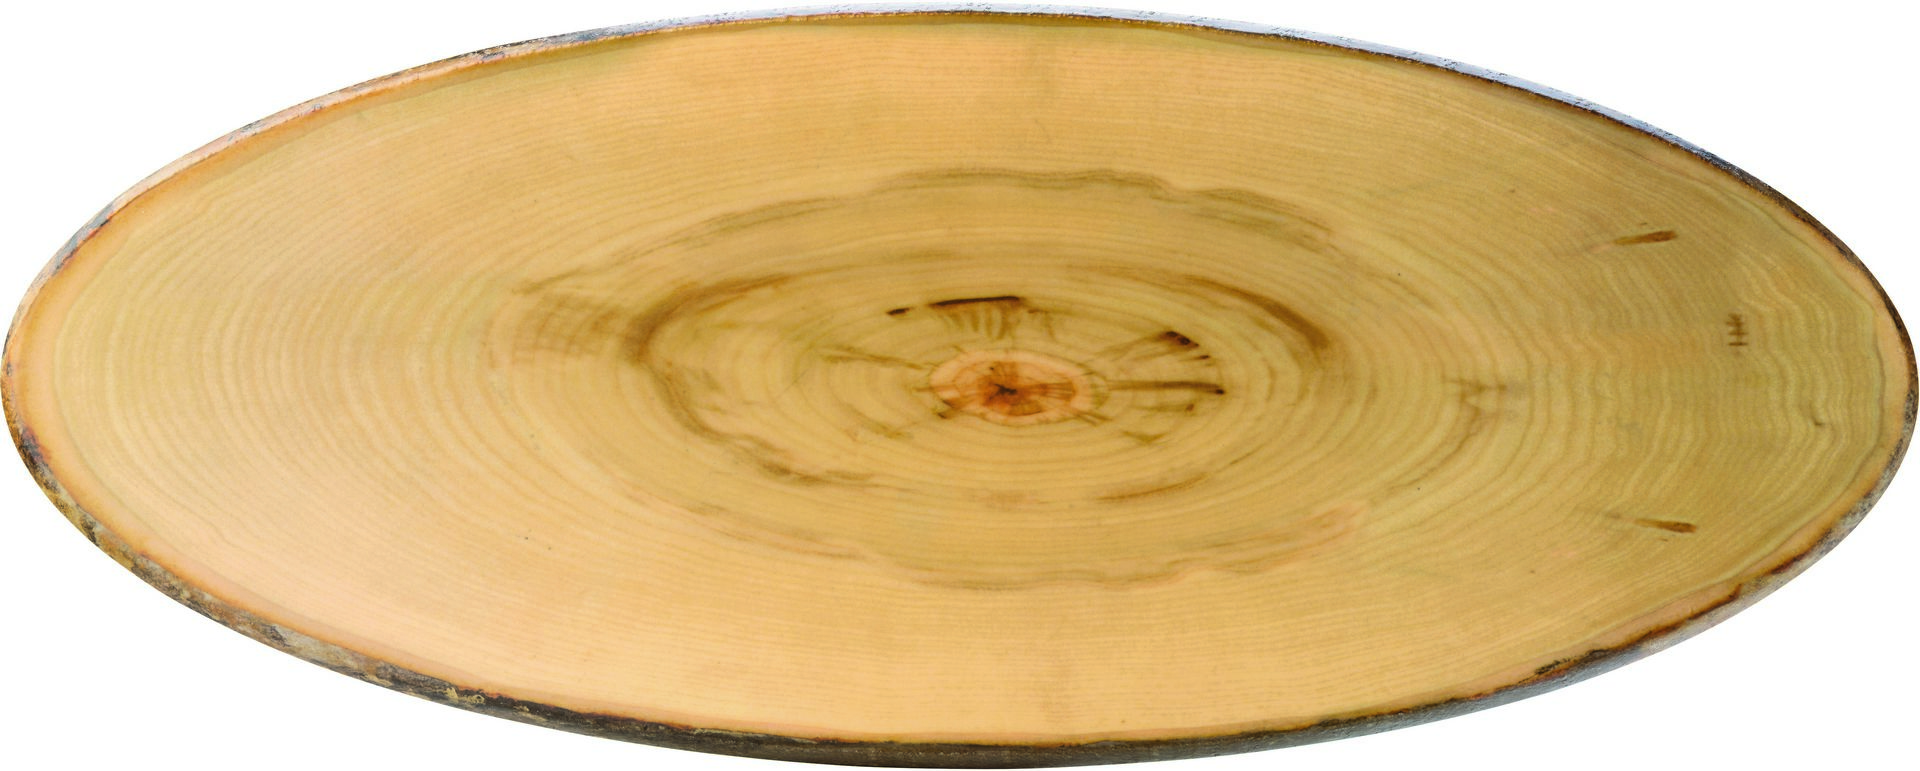 Elm Footed Oval Platter 25.5 x 10